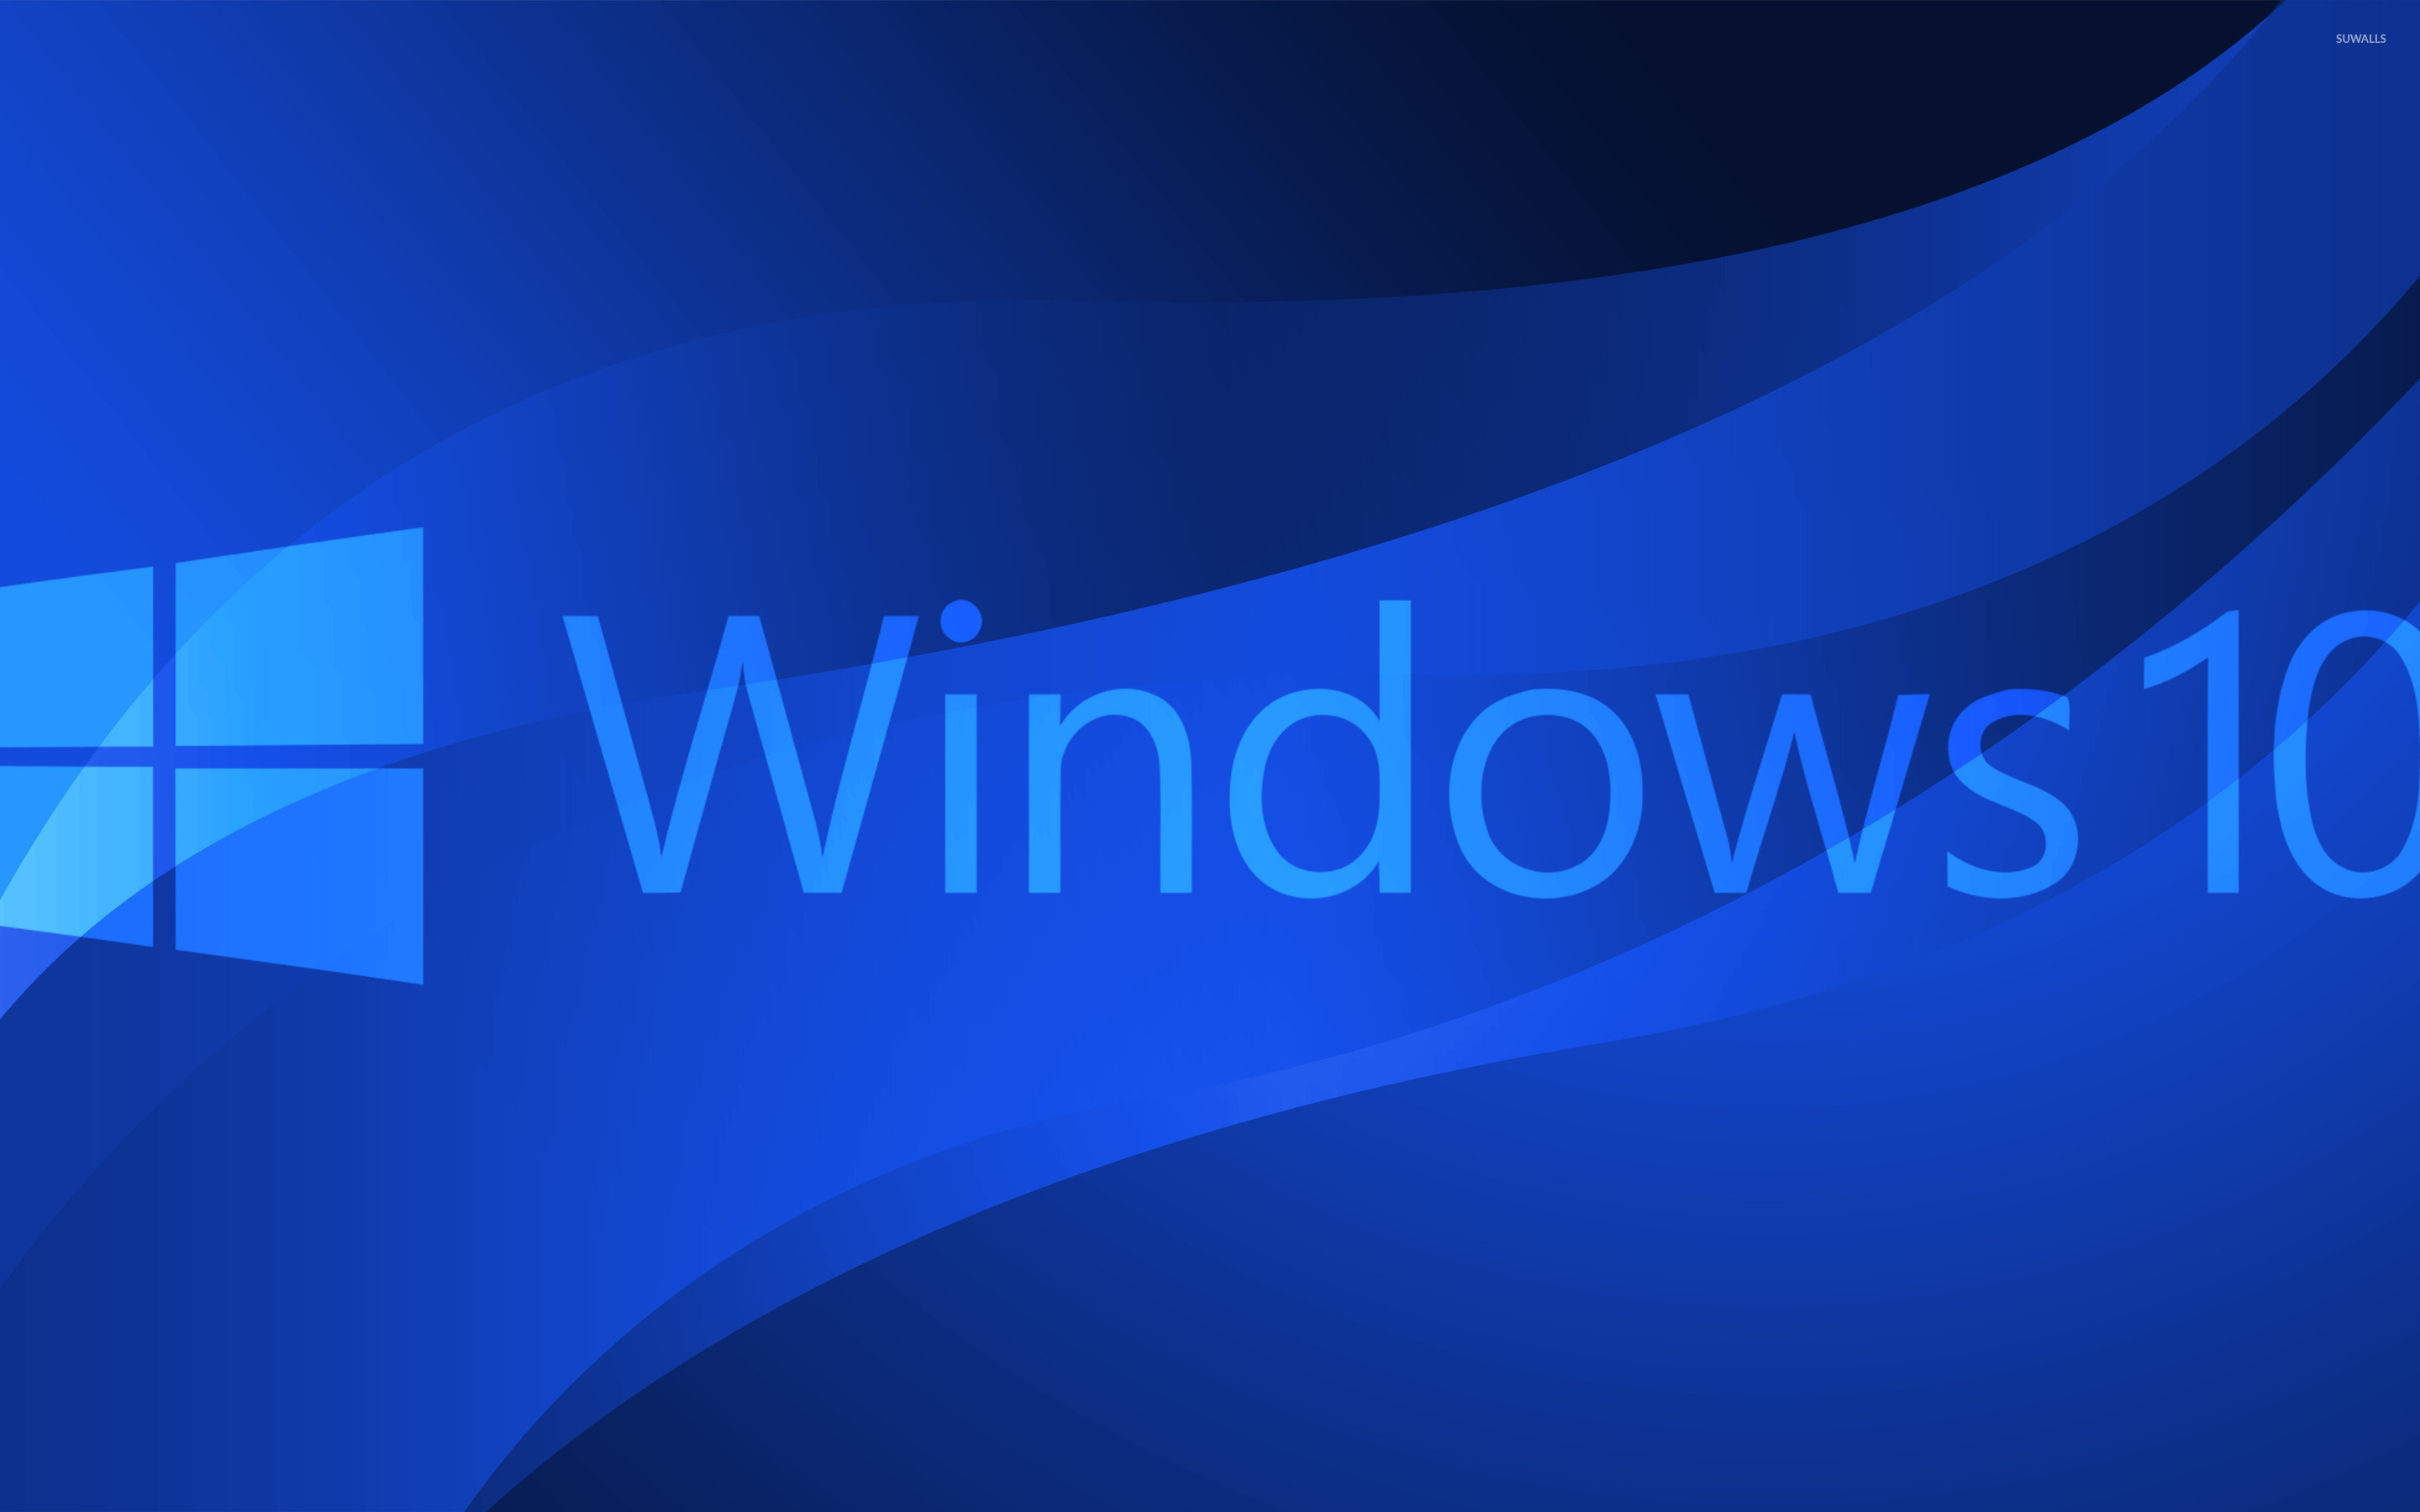 Windows 10 text logo on blue curves wallpaper - Computer wallpapers ...